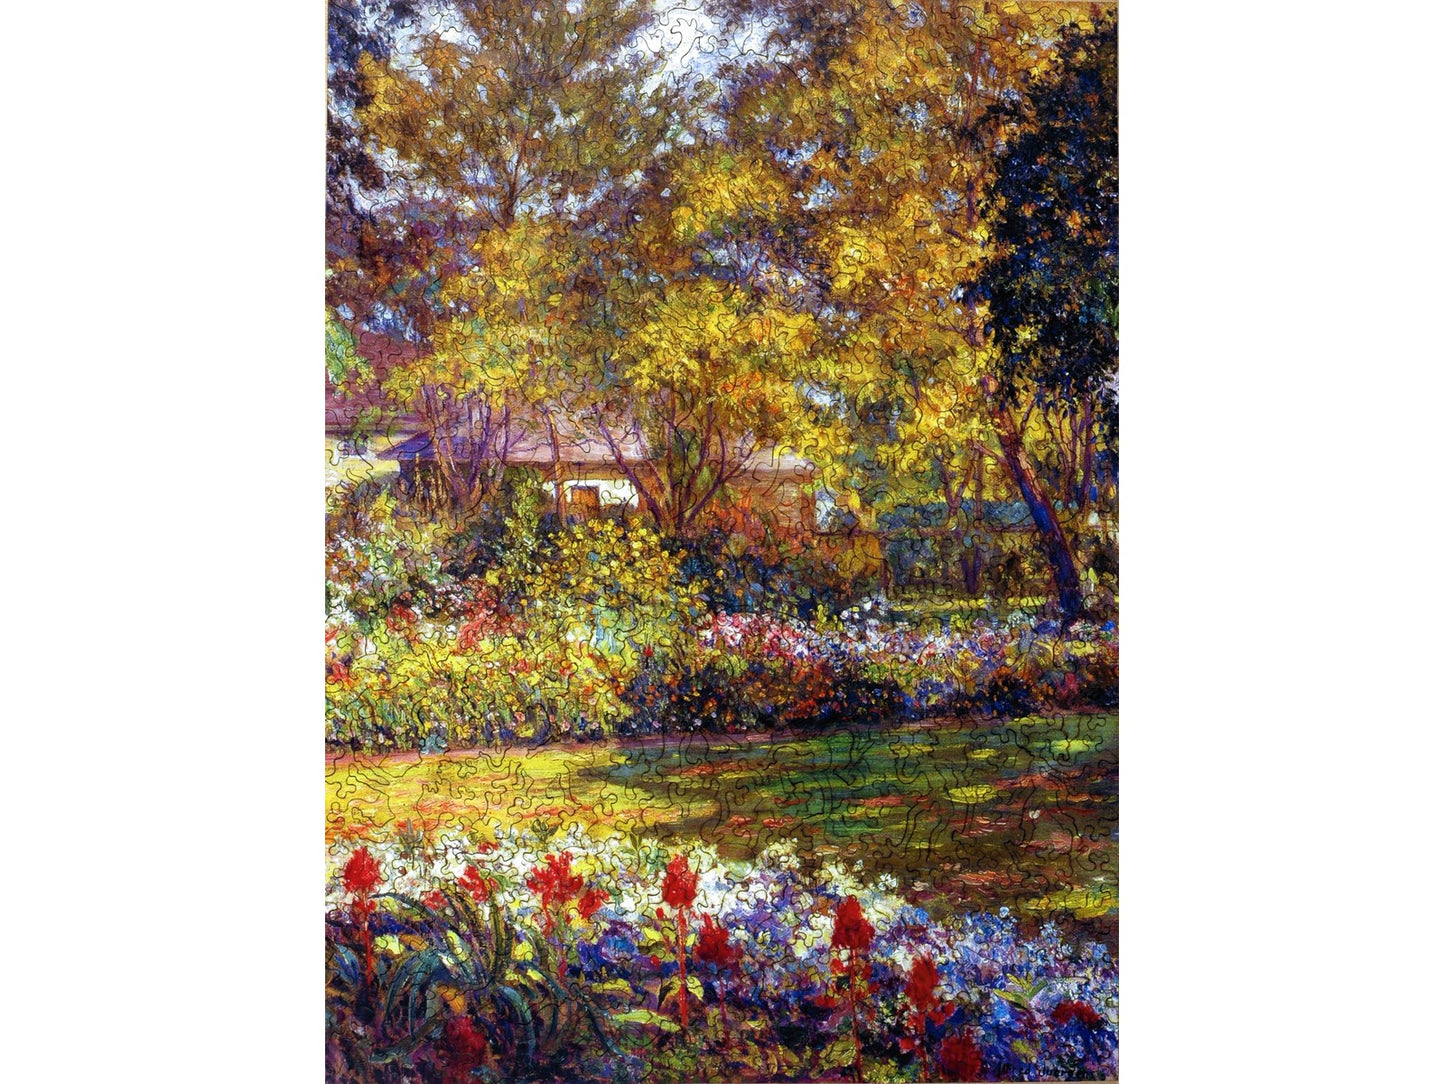 The front of the puzzle, September Garden, which shows a painting of a colorful garden with trees around it. 